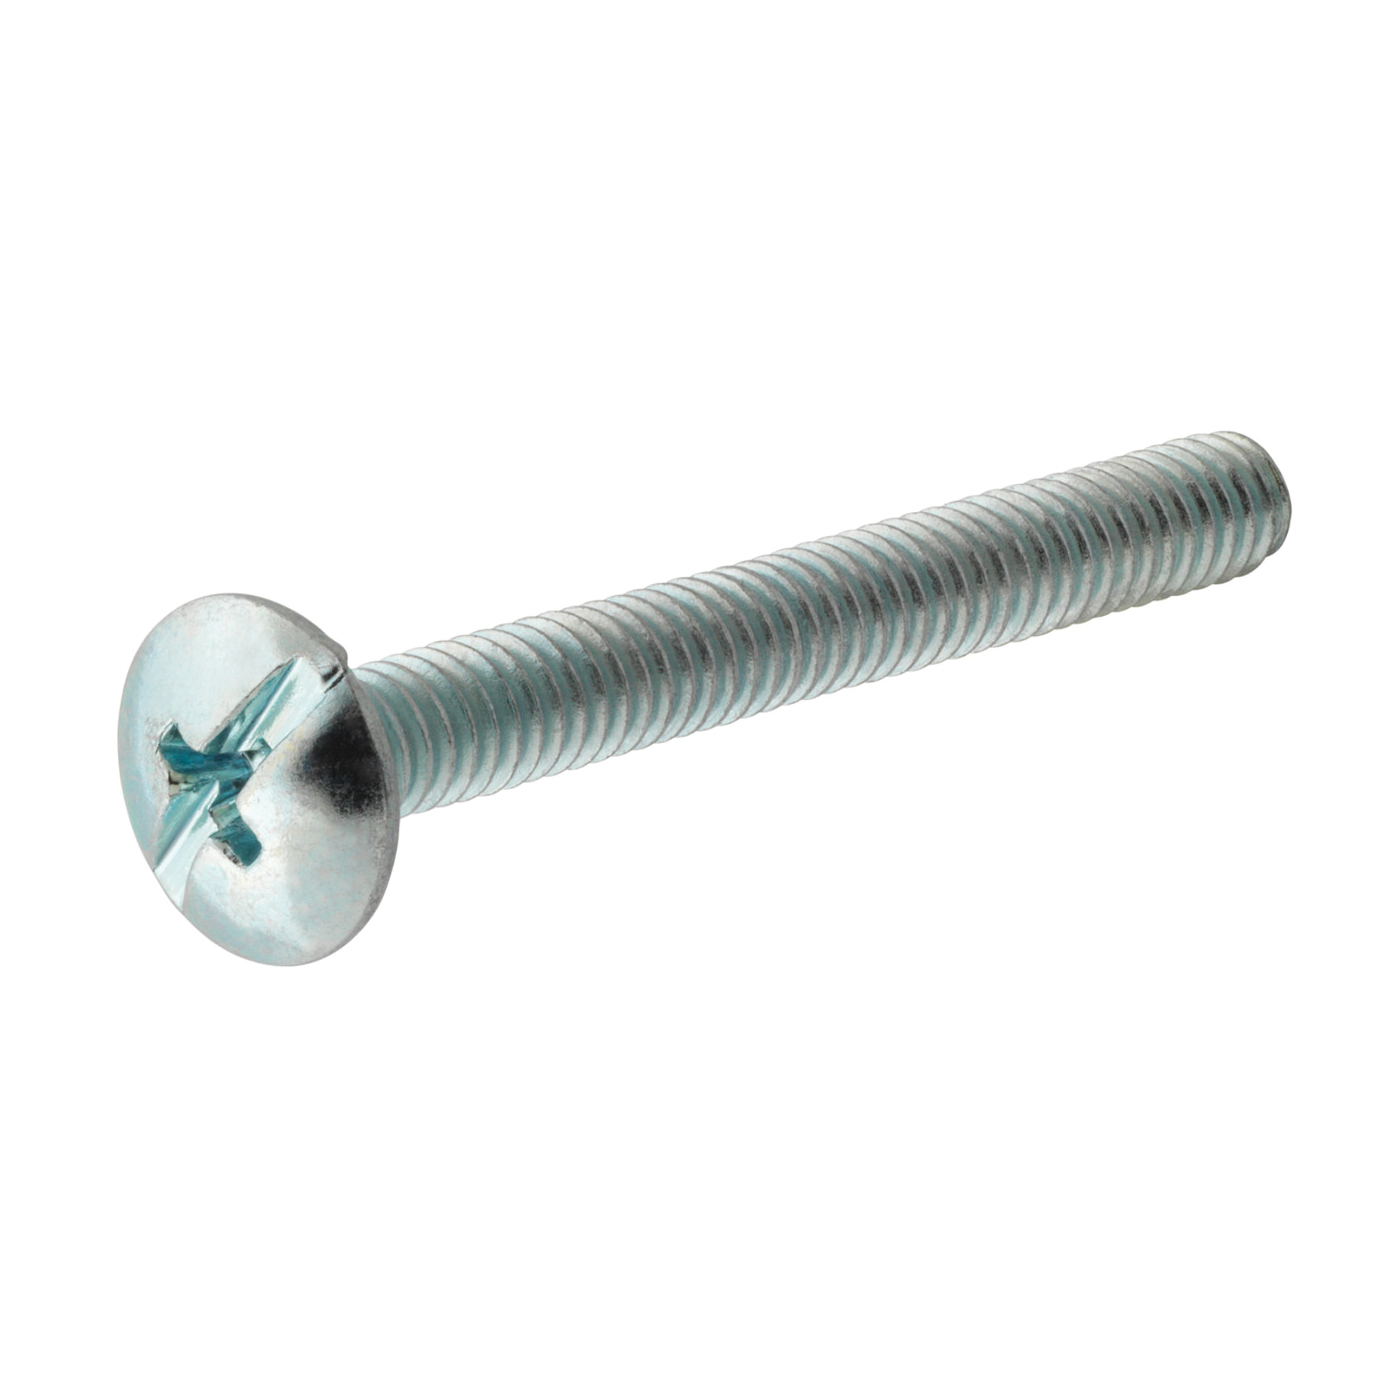 881052 Machine Screw, #8-32 Thread, 2 in L, Truss Head, Phillips, Slotted Drive, Stainless Steel